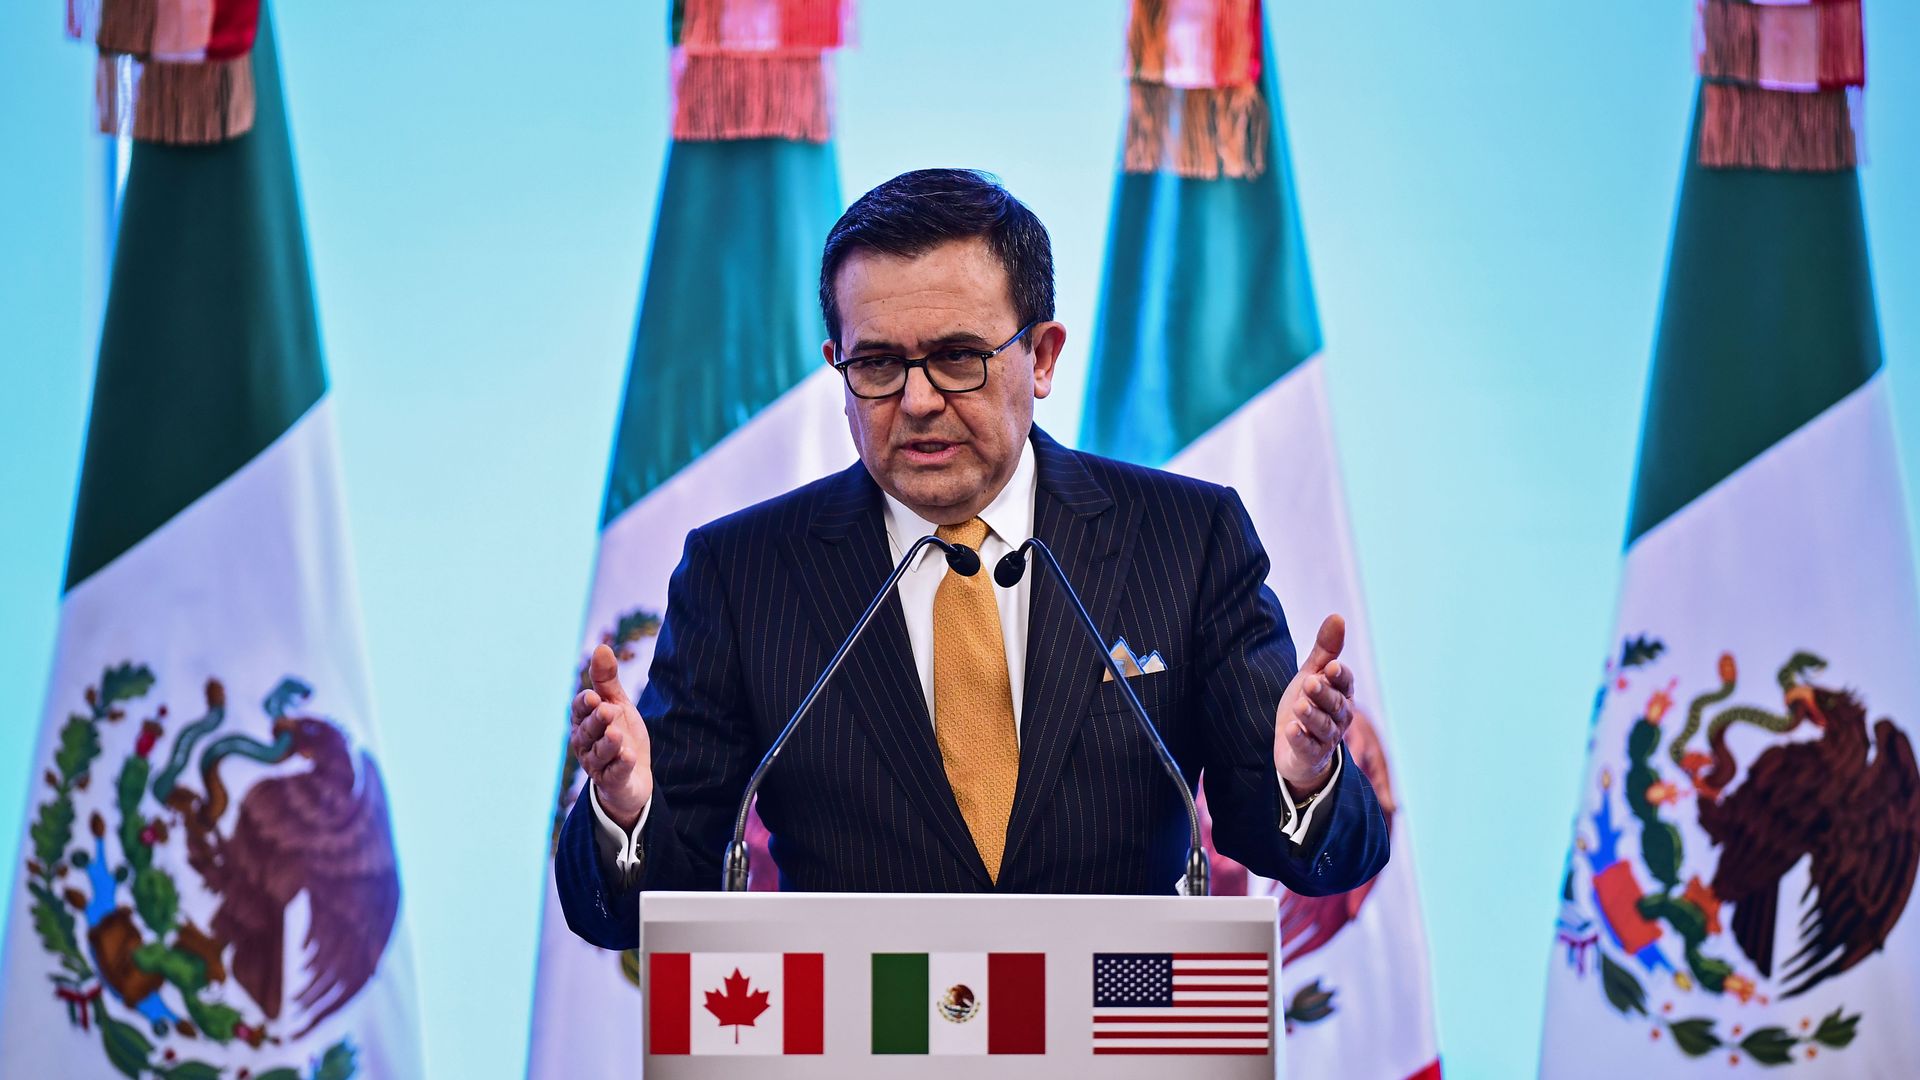 Mexican economic minister speaking to media